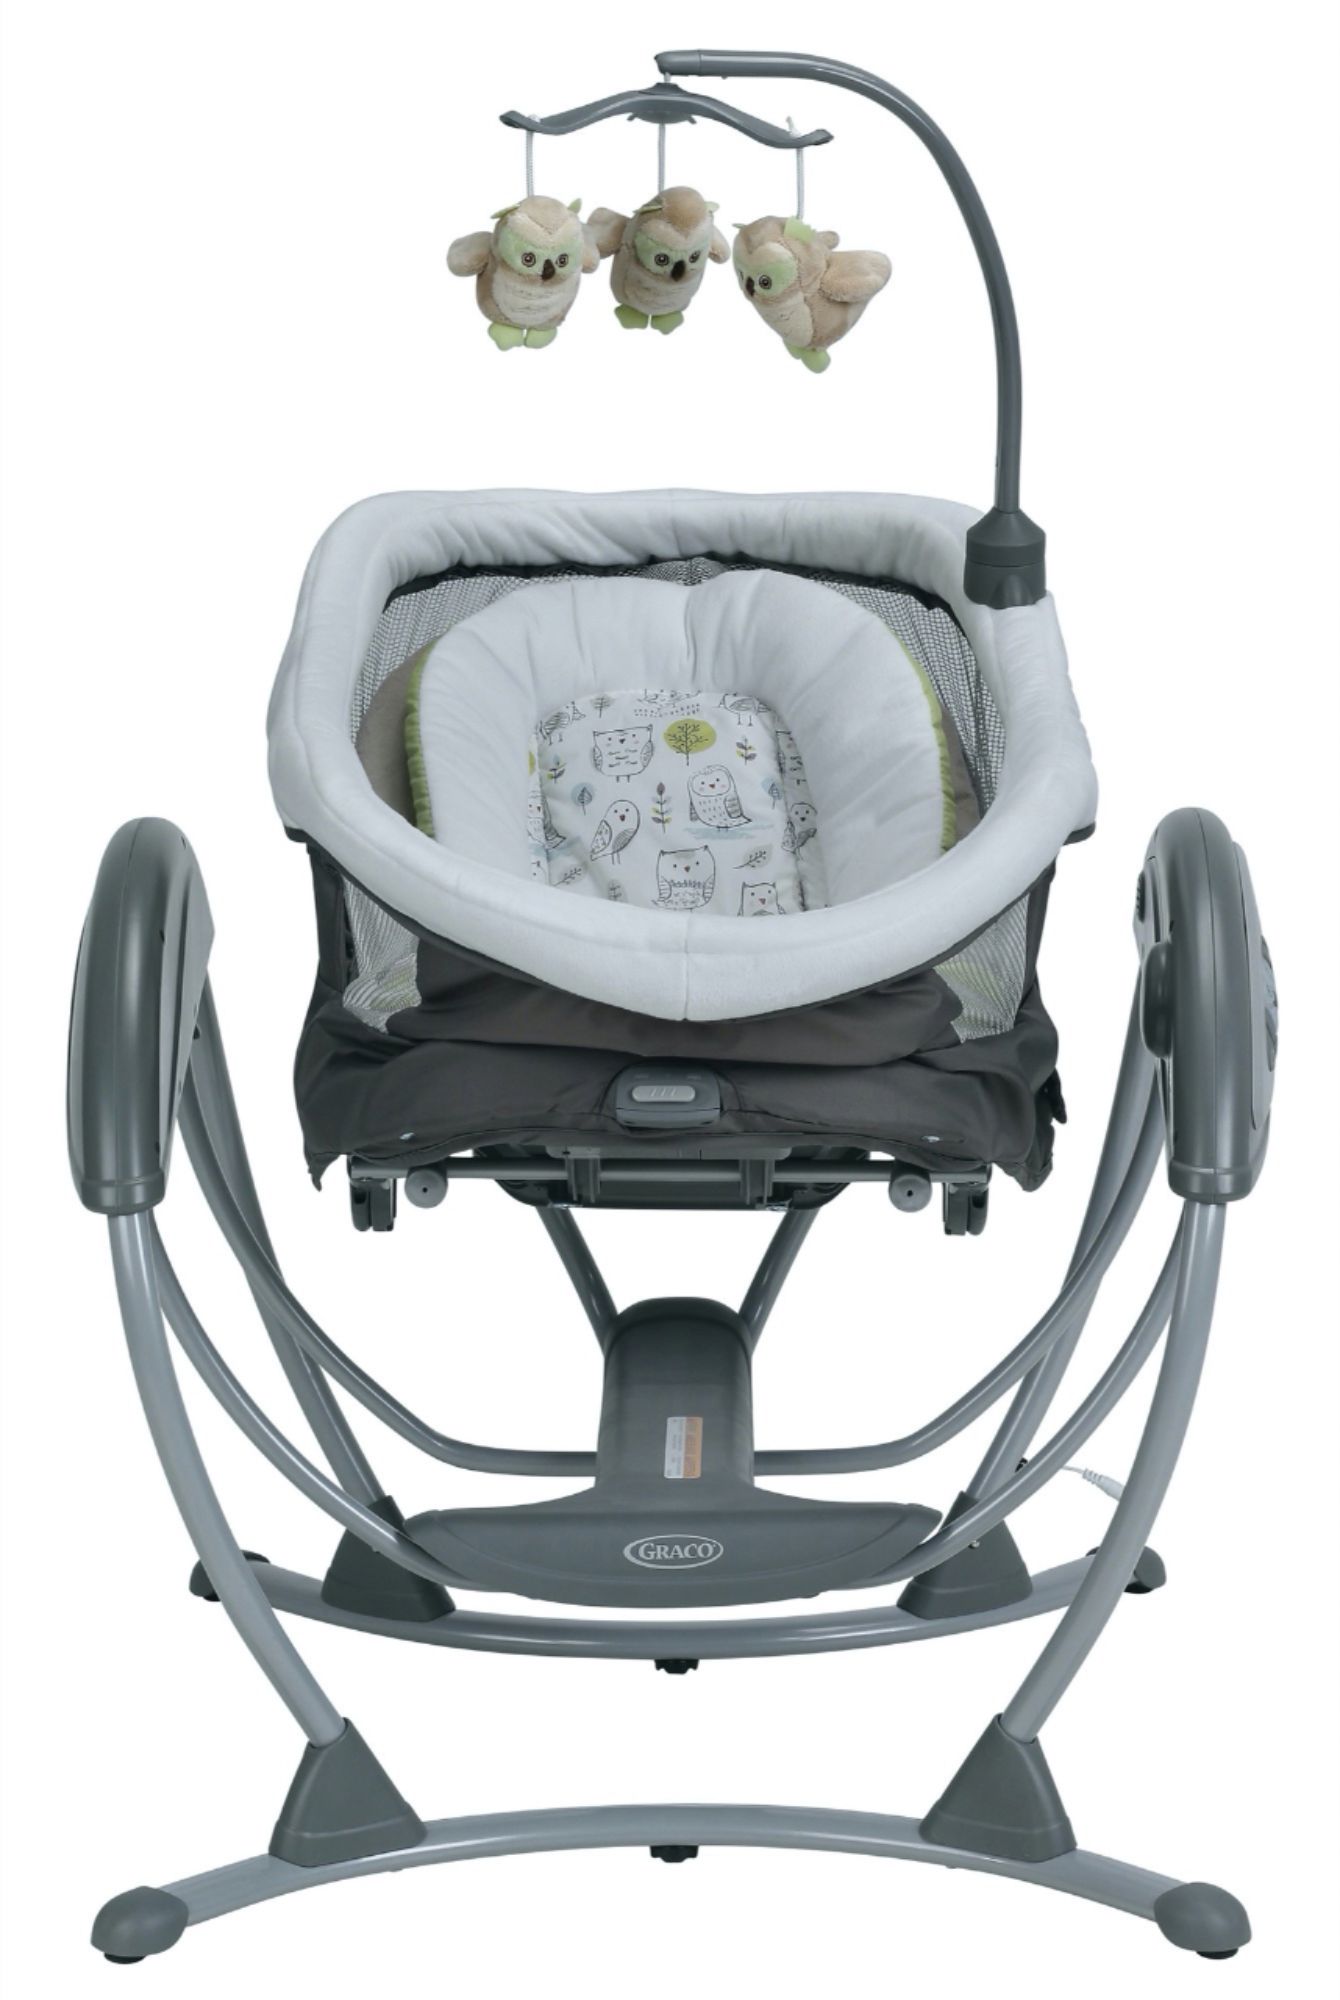 Left View: Fisher-Price Infant-to-Toddler Rocker - Pacific Pebble, Baby Seat